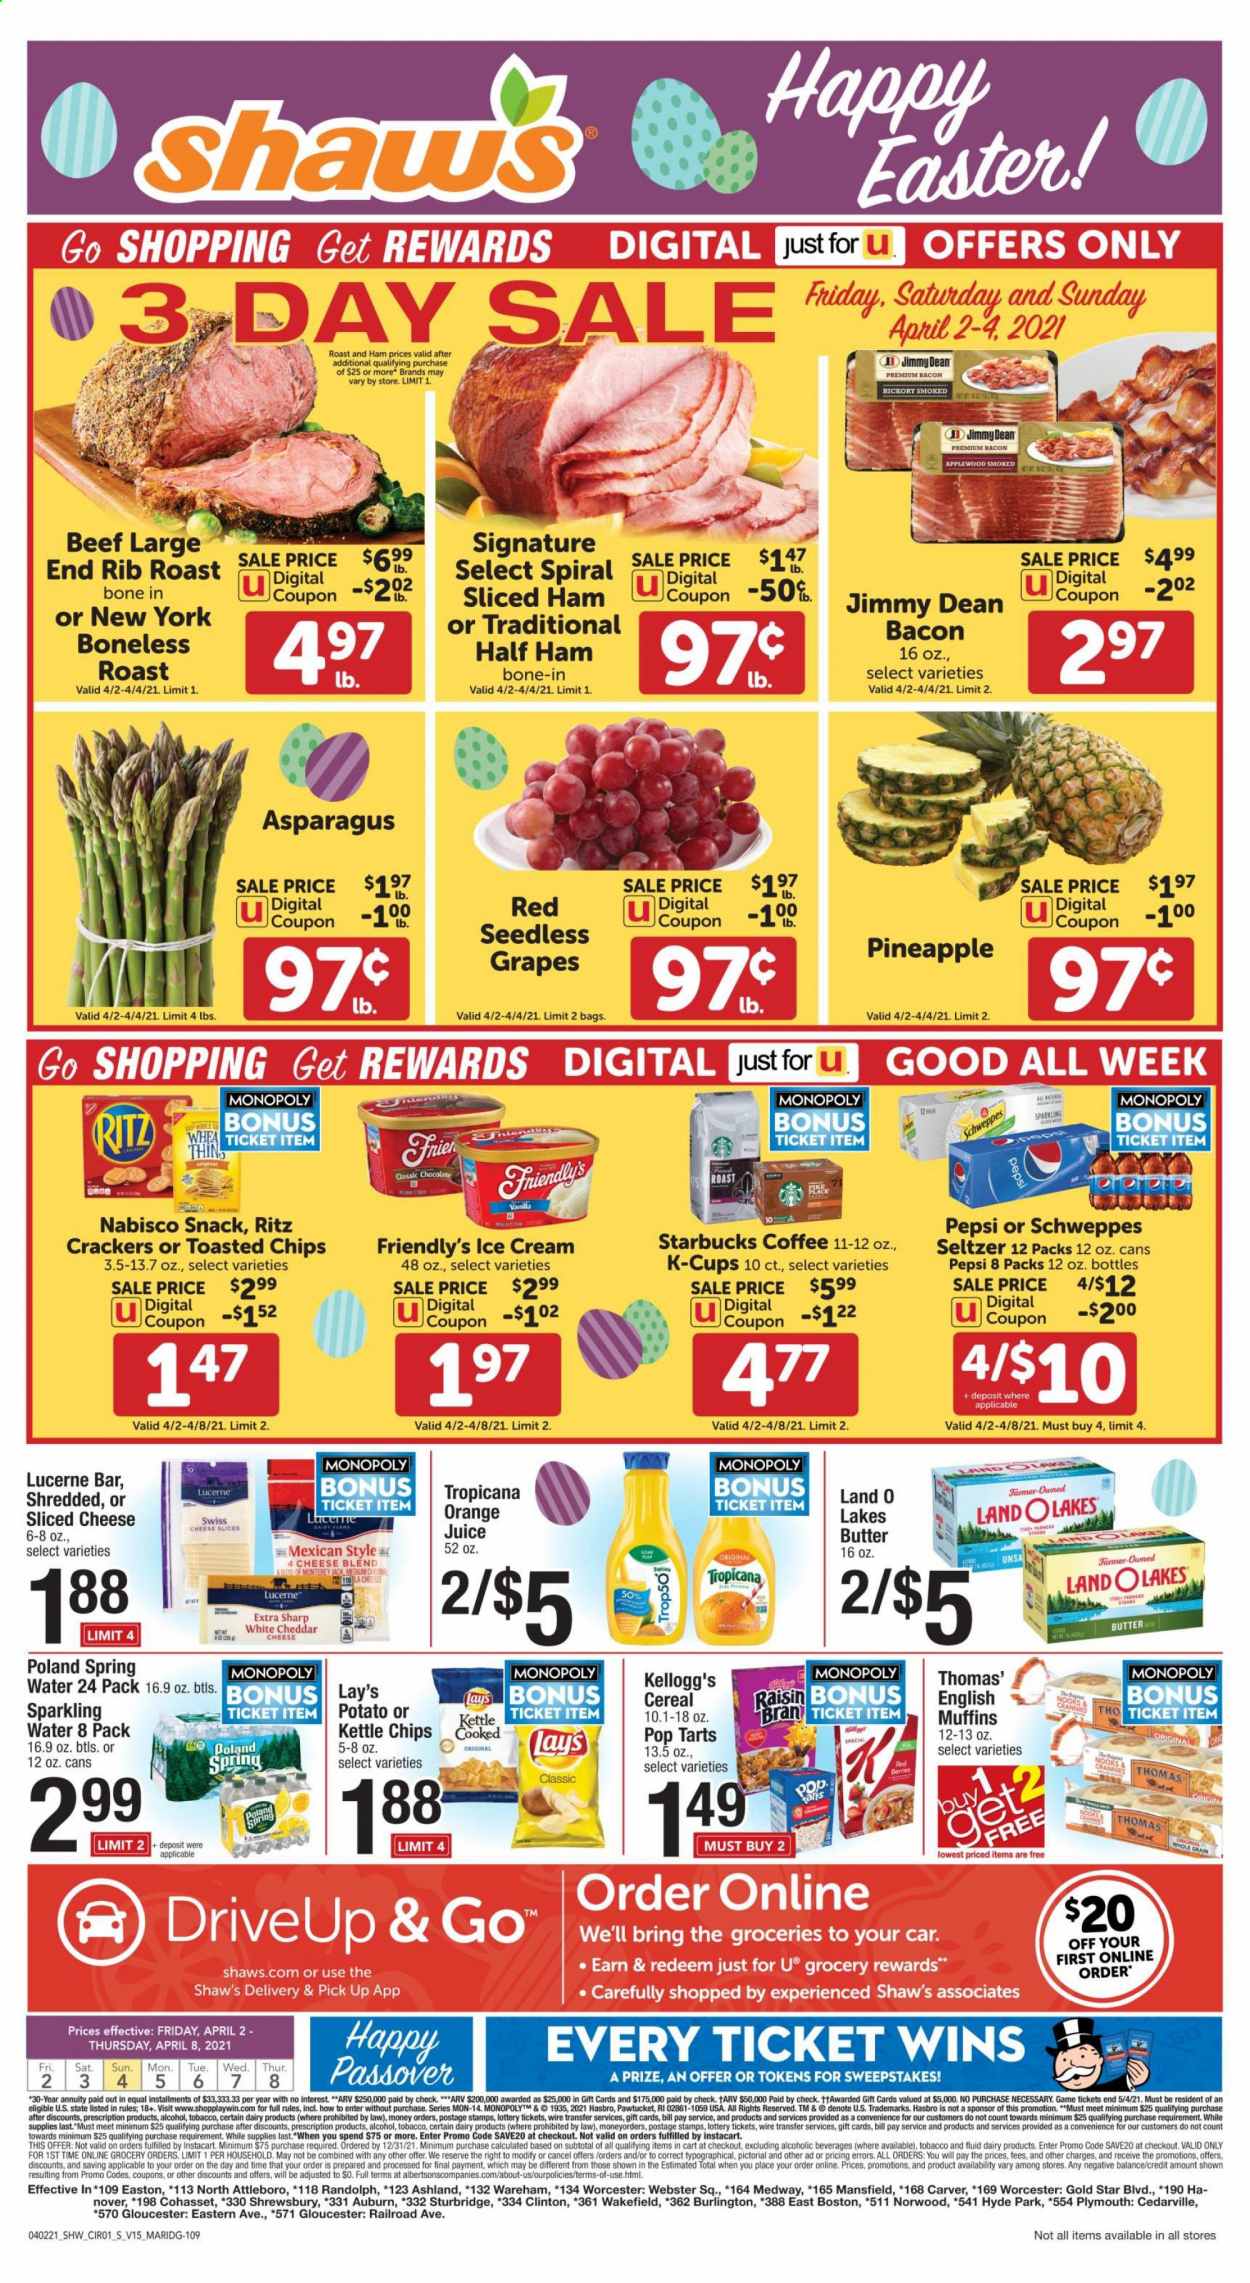 thumbnail - Shaw’s Flyer - 04/02/2021 - 04/08/2021 - Sales products - seedless grapes, muffin, asparagus, english muffins, Jimmy Dean, bacon, half ham, ham, sliced cheese, cheese, butter, ice cream, Friendly's Ice Cream, crackers, Kellogg's, Pop-Tarts, RITZ, chips, snack, Lay’s, cereals, raisins, Schweppes, Pepsi, orange juice, juice, seltzer water, spring water, sparkling water, coffee, Starbucks, coffee capsules, K-Cups, alcohol, Sharp, grapes, pineapple. Page 1.